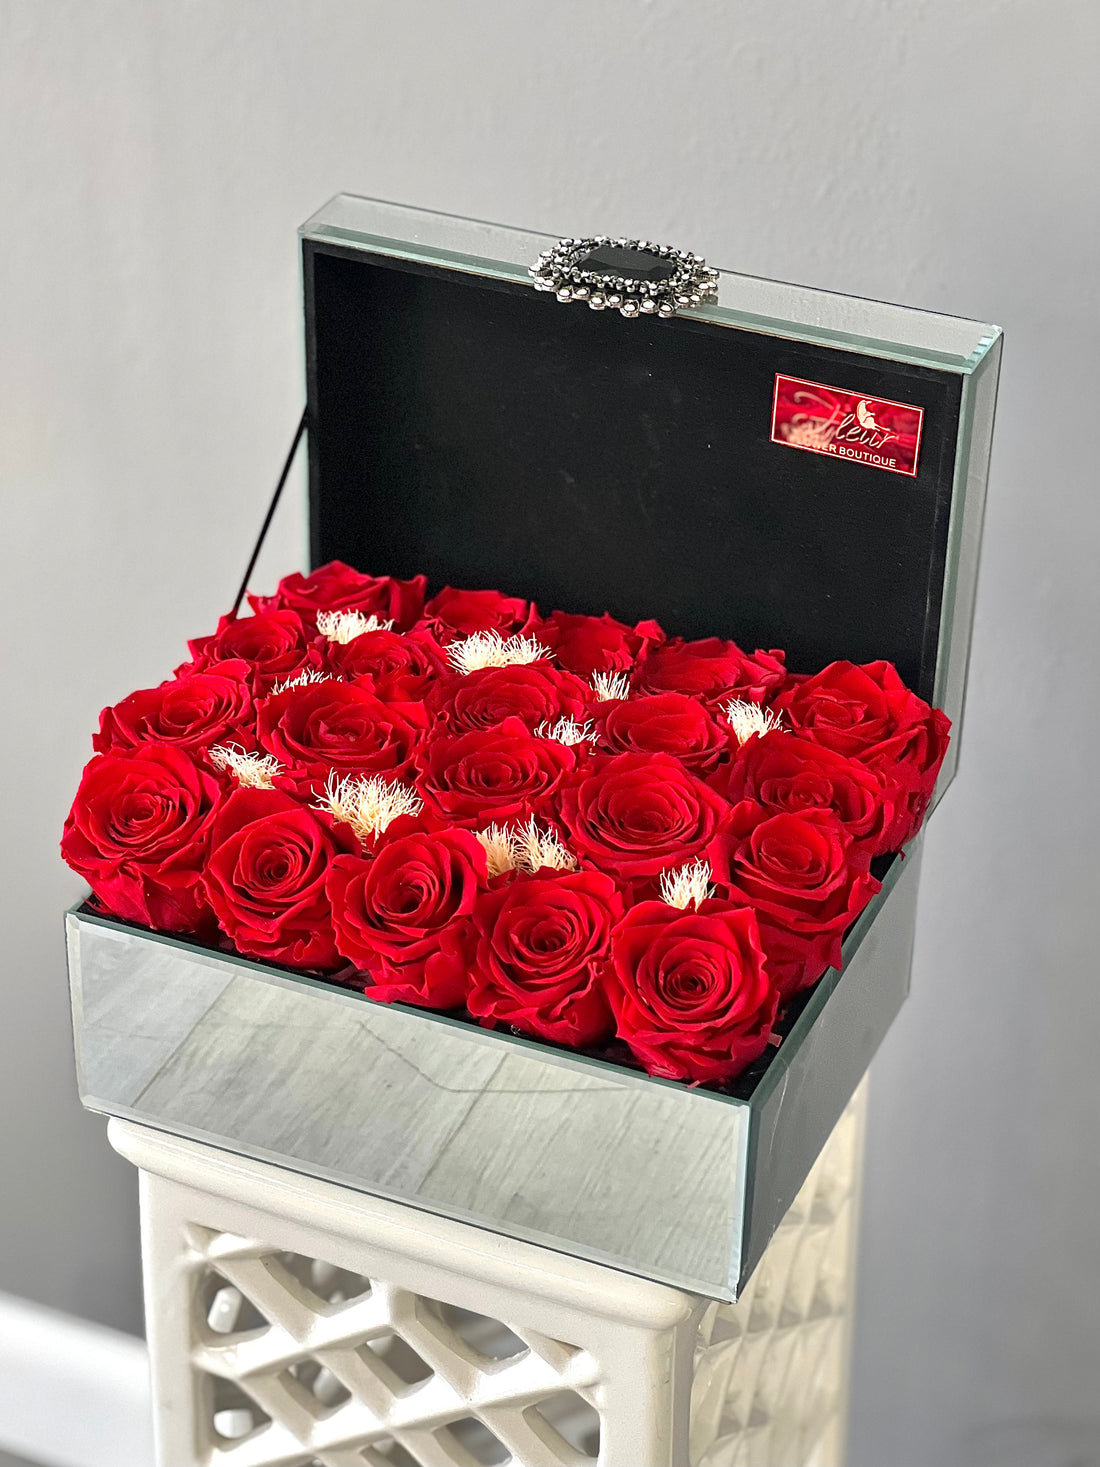 Ruby Radiance Mirror Rose Box: Preserved Roses